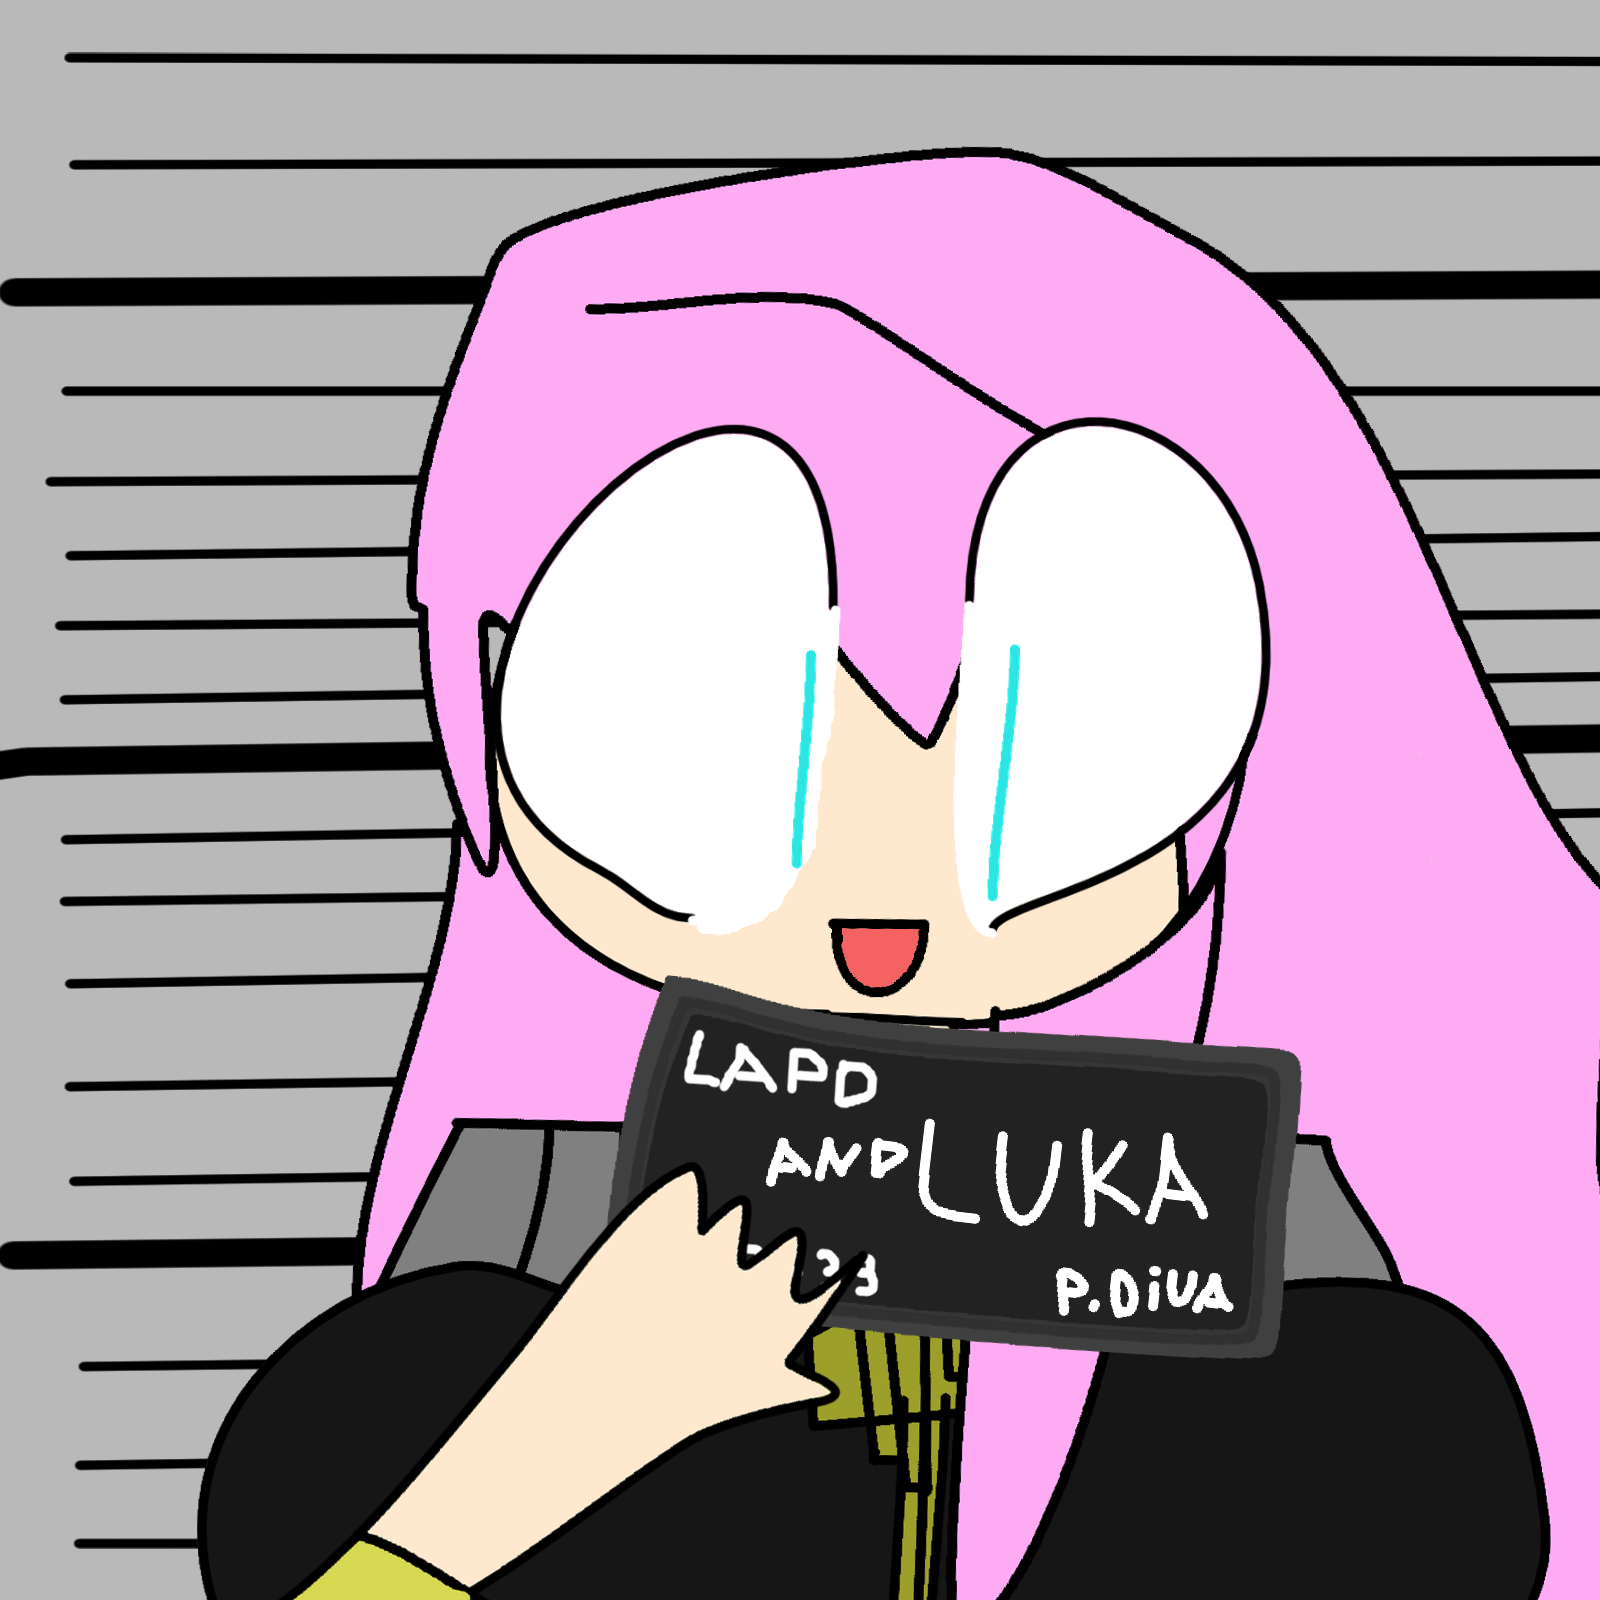 Luka Megurine as Ken from the movie mugshot scene. (You guessed it, self-ship moment!)